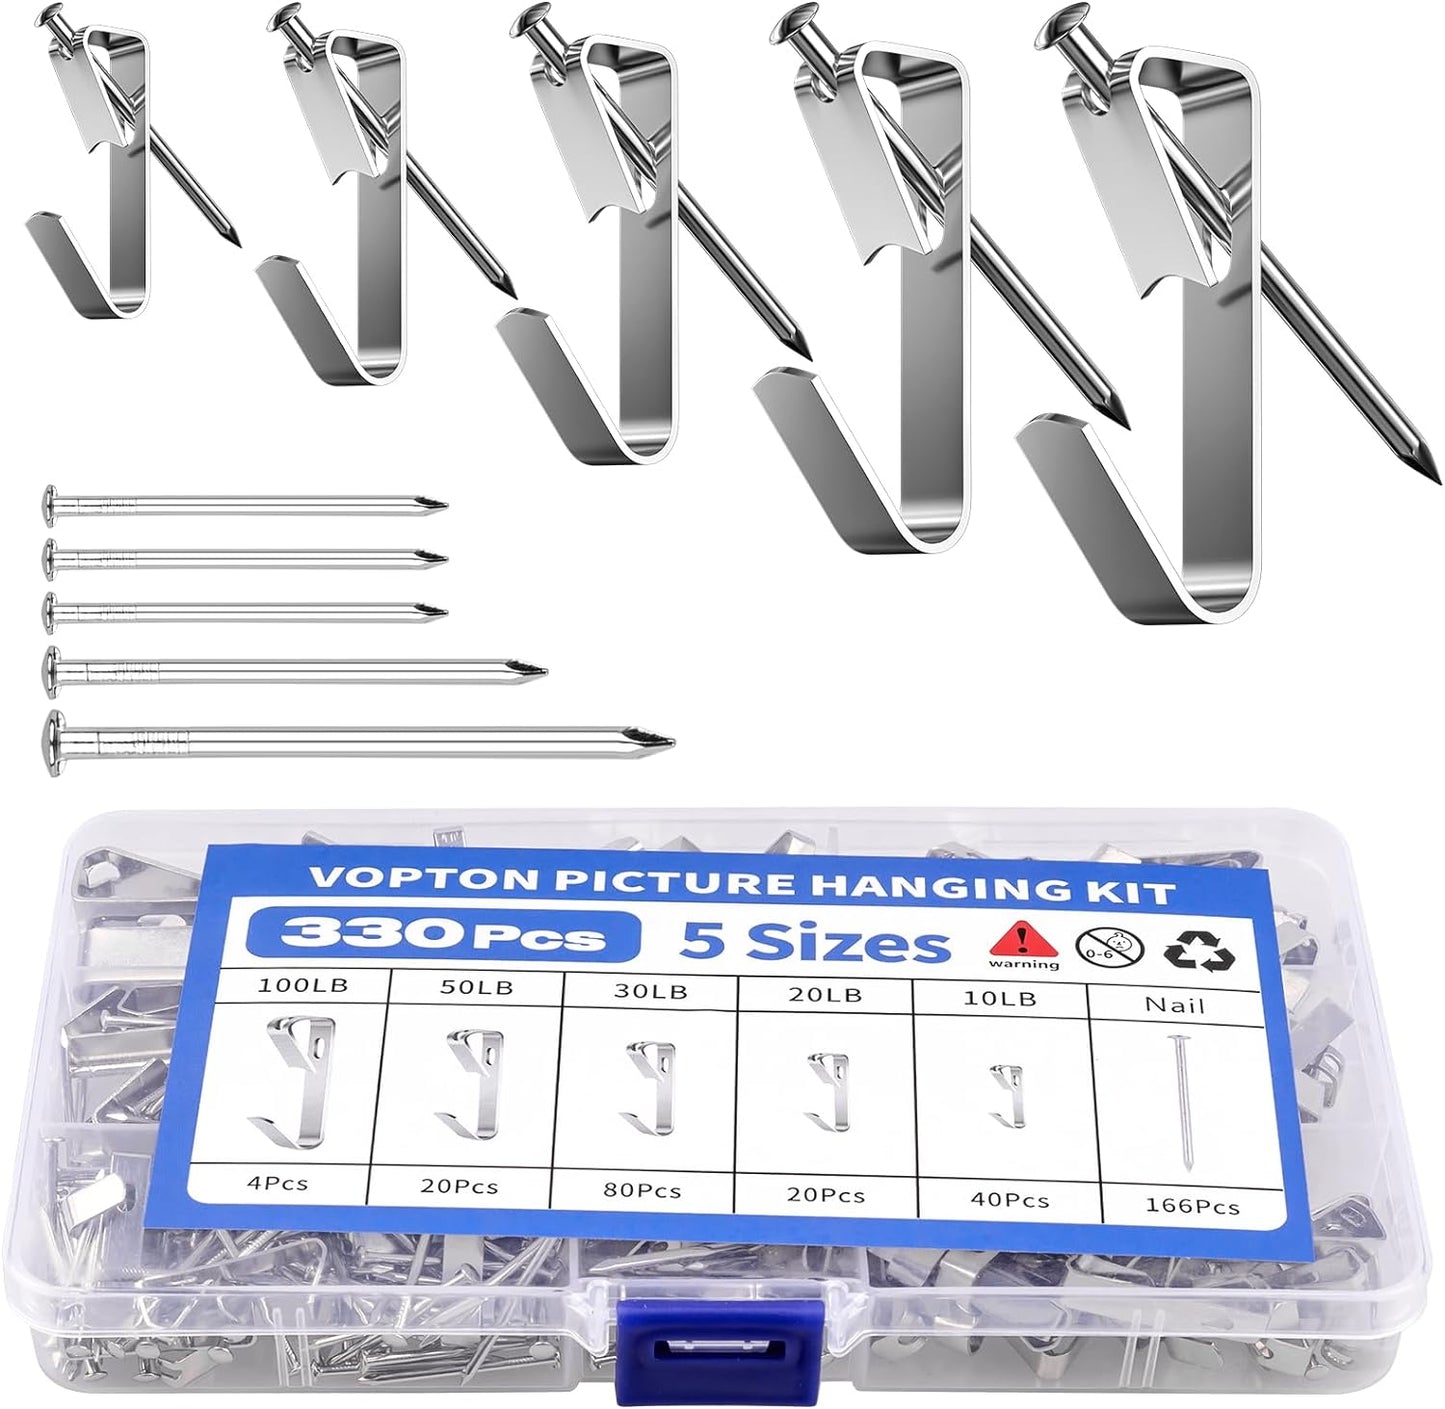 330Pcs Picture Hanging Kit, Heavy Duty Picture Hangers for Drywall, Picture Hanging Hooks